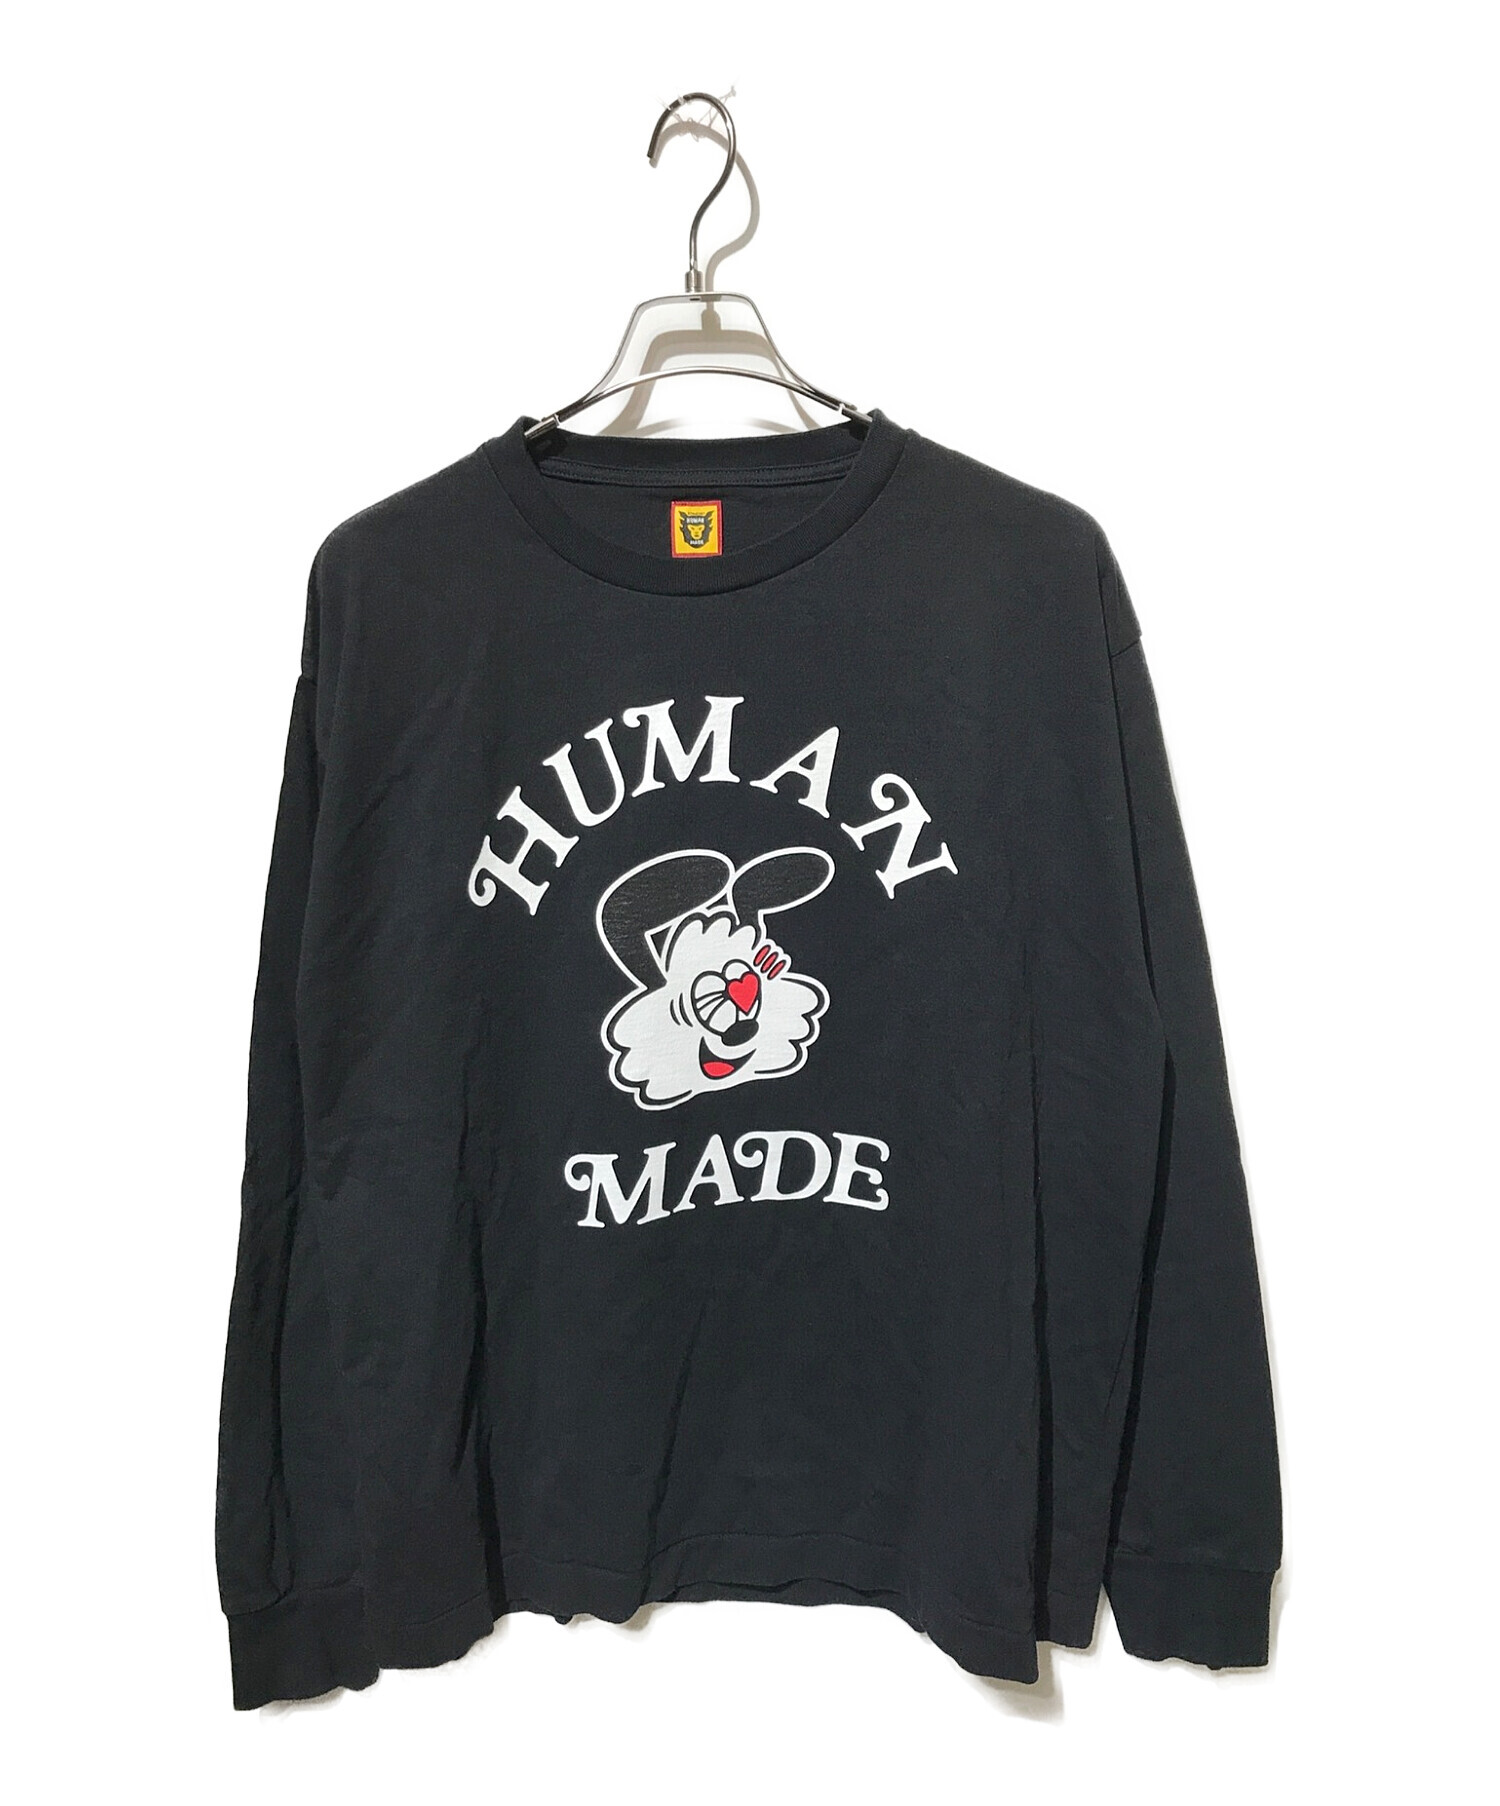 XL黒 HUMAN MADE × Girls Don't Cry Tシャツ